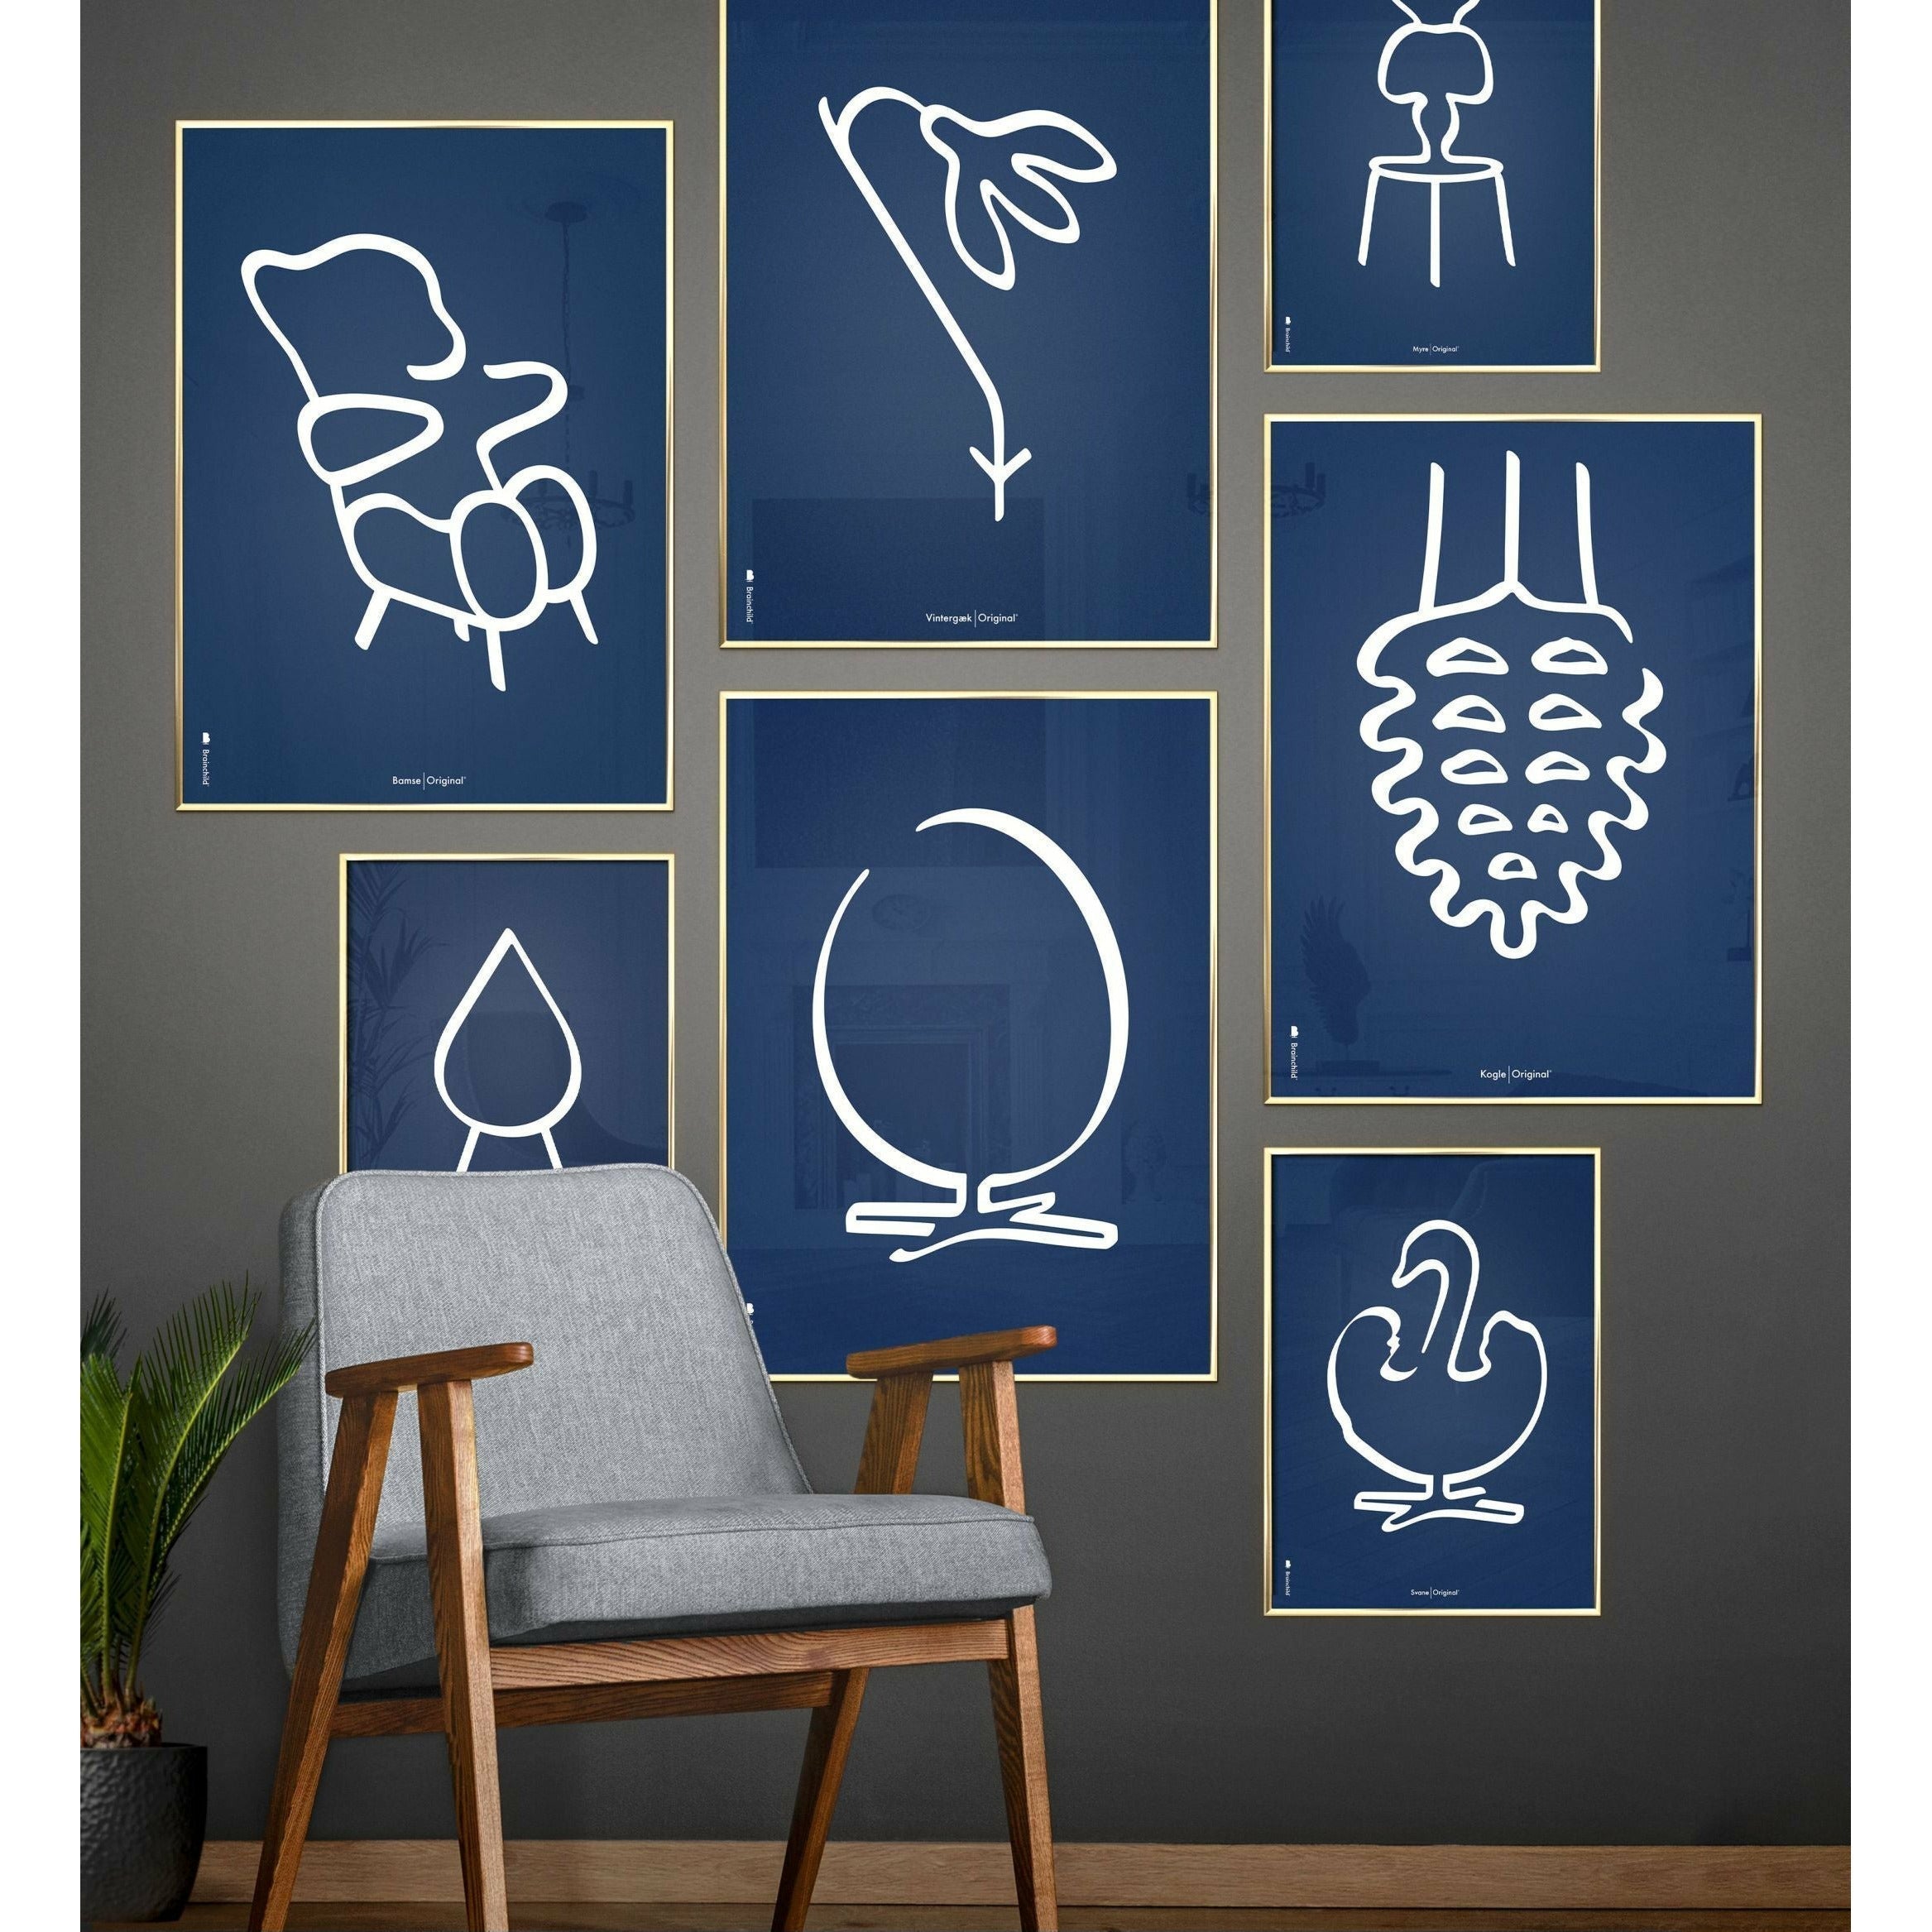 Brainchild Ant Line Poster, Frame In Black Lacquered Wood 70x100 Cm, Blue Background